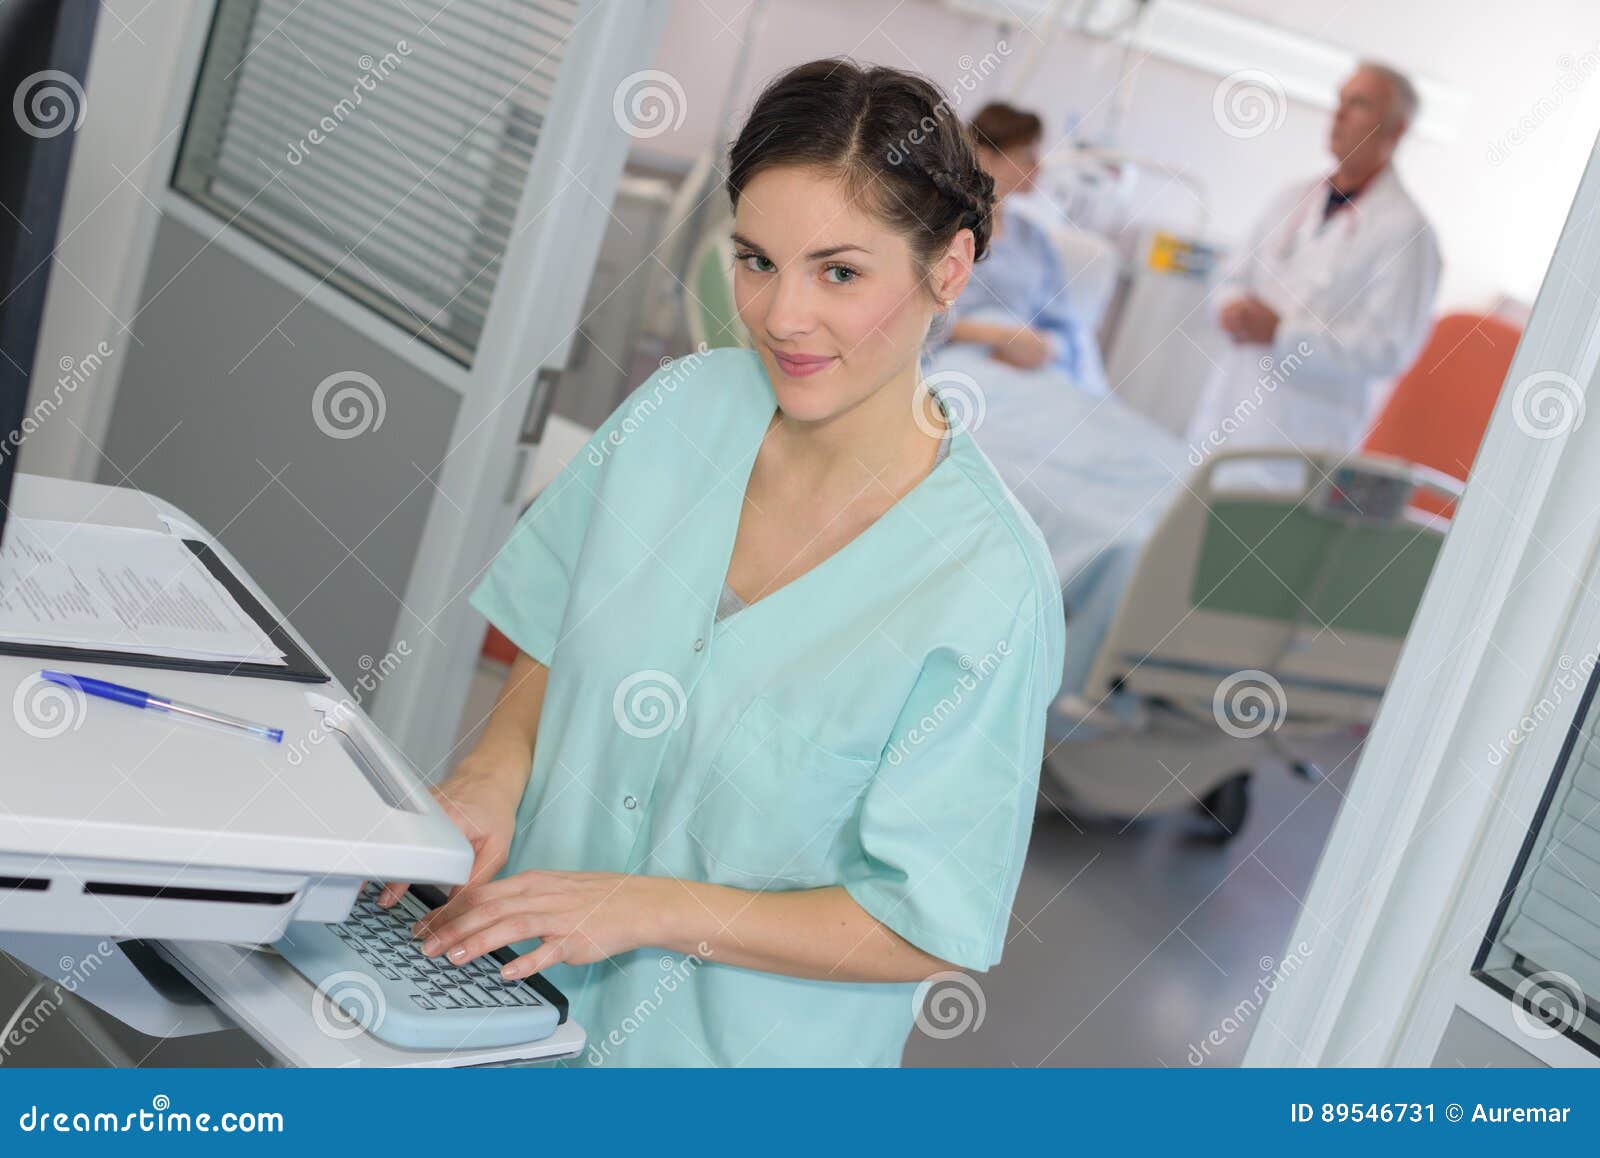 medical assistant input records